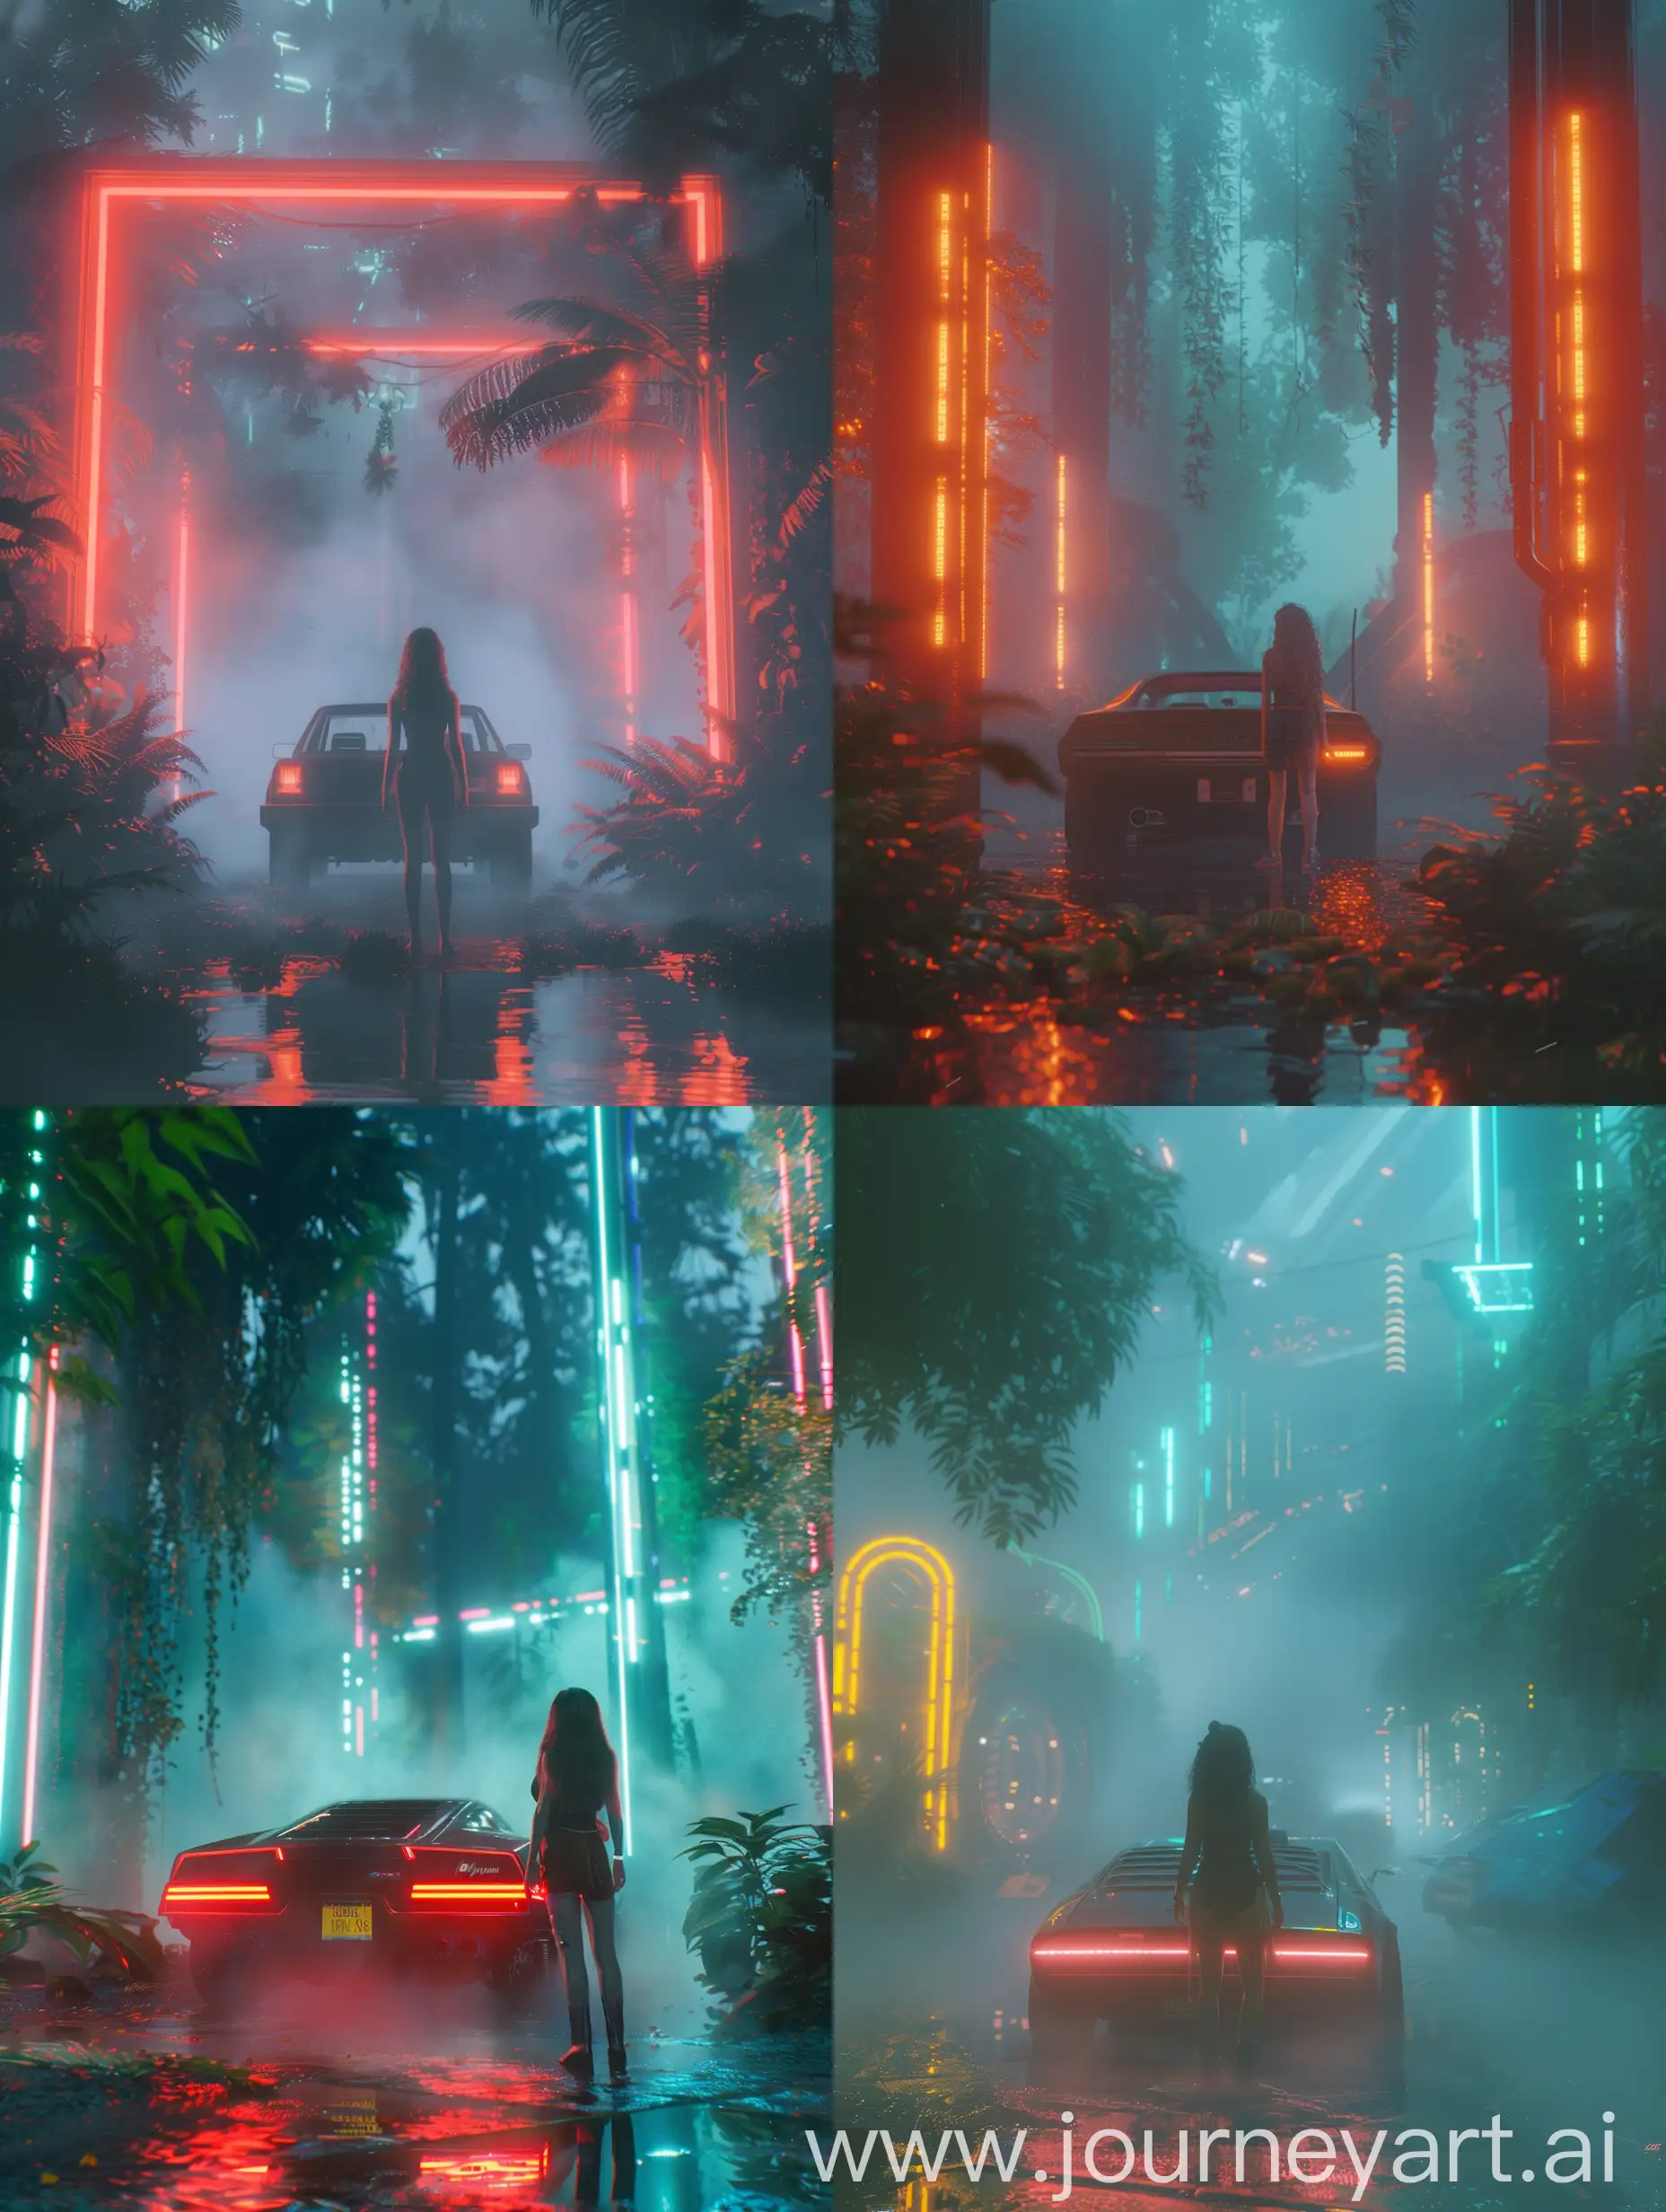 Create a cinematic scene featuring a beautiful girl standing in front of a car in a sci-fi setting. The scene should be enveloped in thick fog and illuminated by neon lights, giving it a forestpunk aesthetic. Please ensure that the scene is framed in a 16:9 aspect ratio, as if captured by a Super 8 mm camera